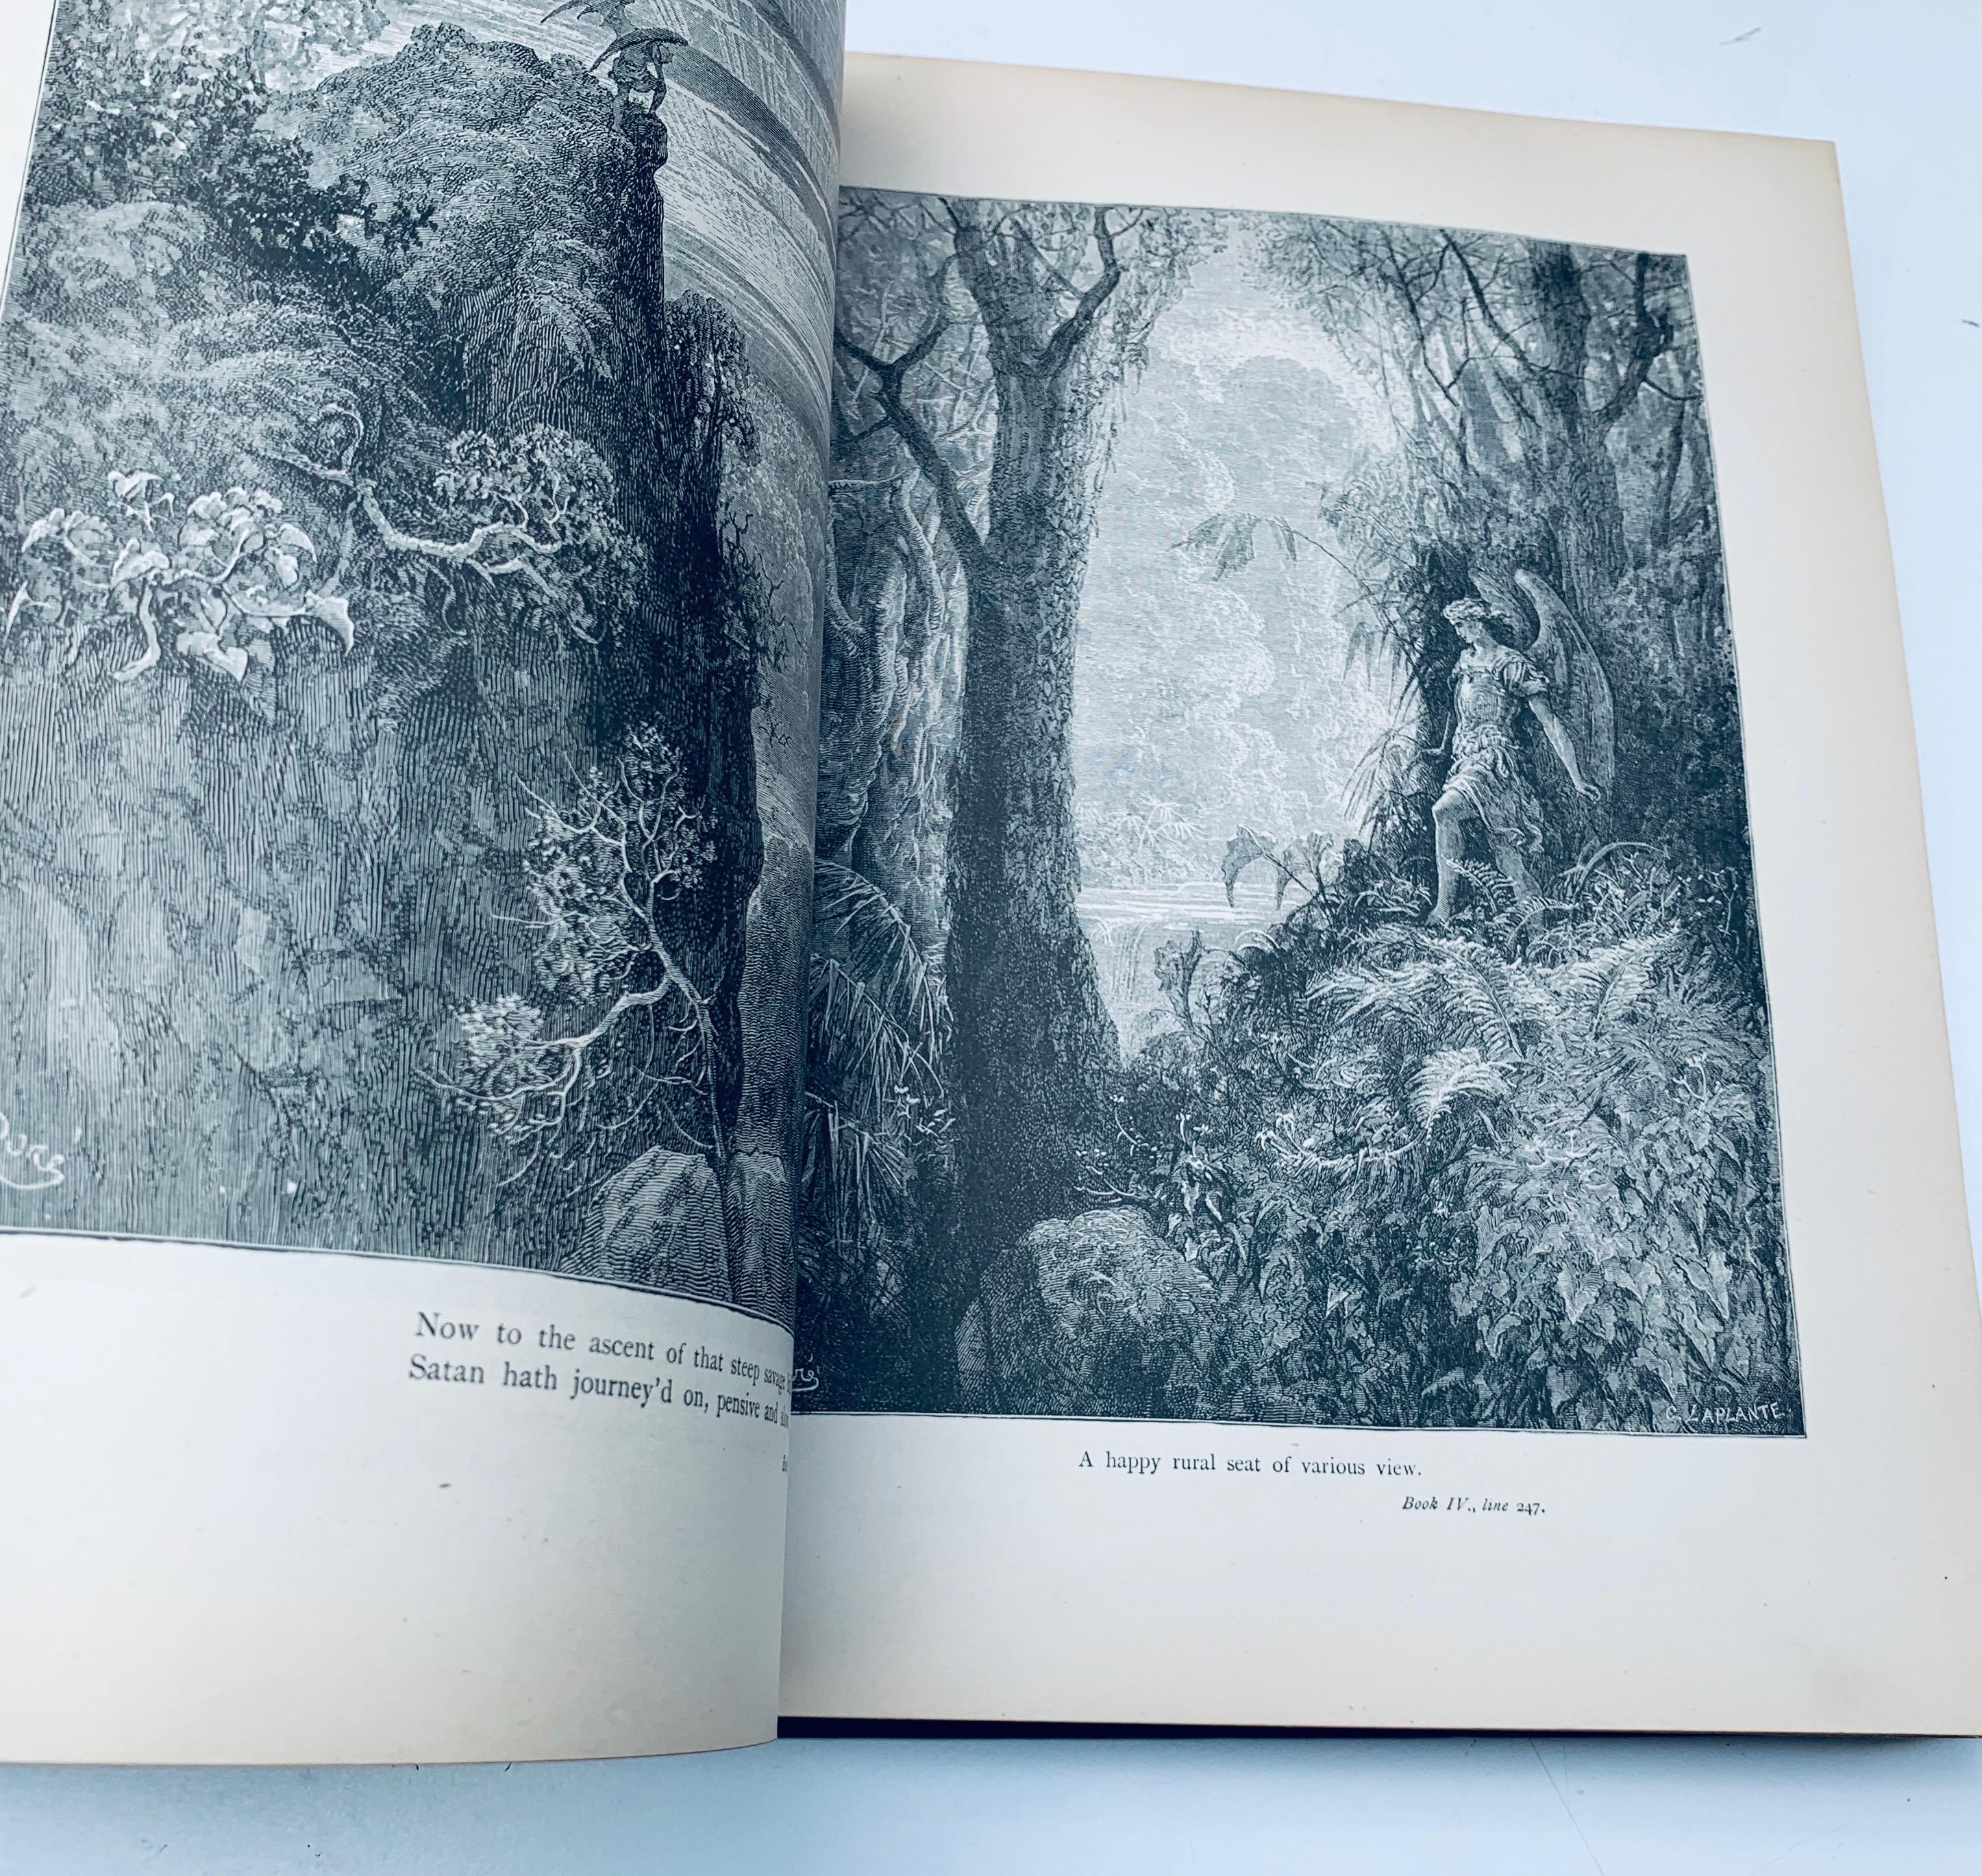 RARE Milton's PARADISE LOST (c.1880) Illustrations by GUSTAVE DORE